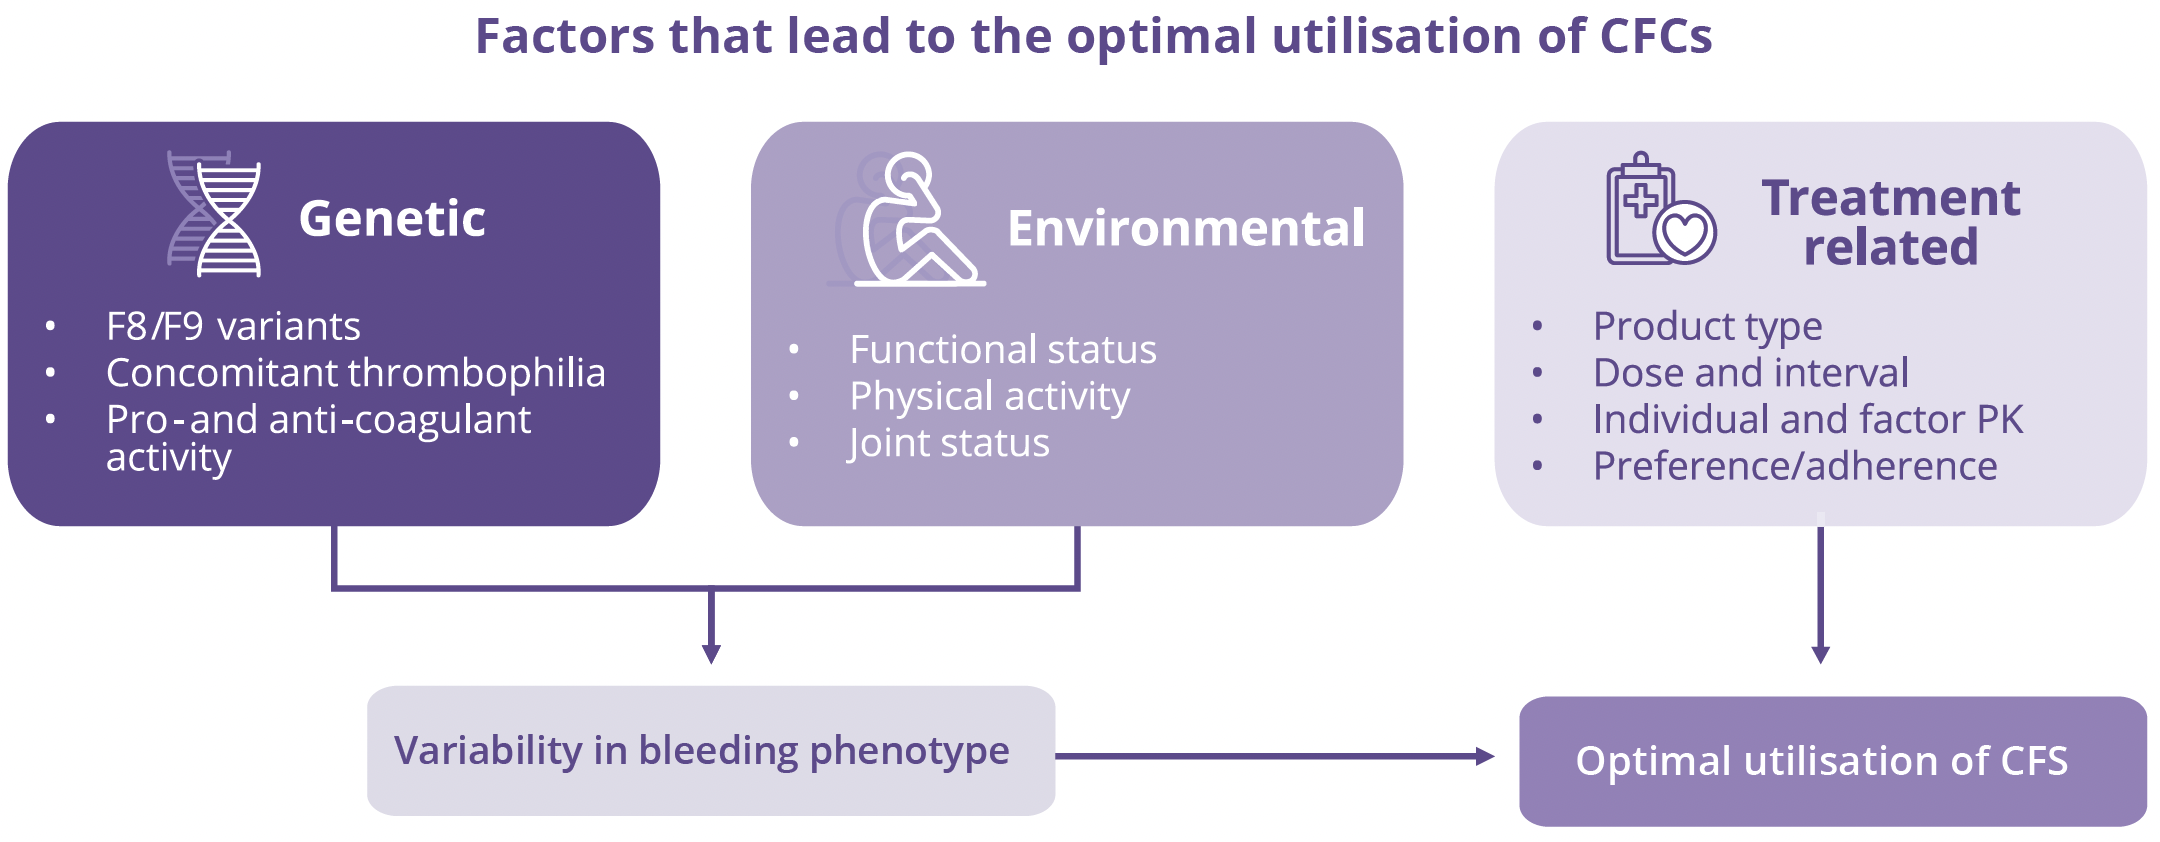 Factors that lead to optimal utilisation of CFCs include those that are genetic, environmental and treatment-related